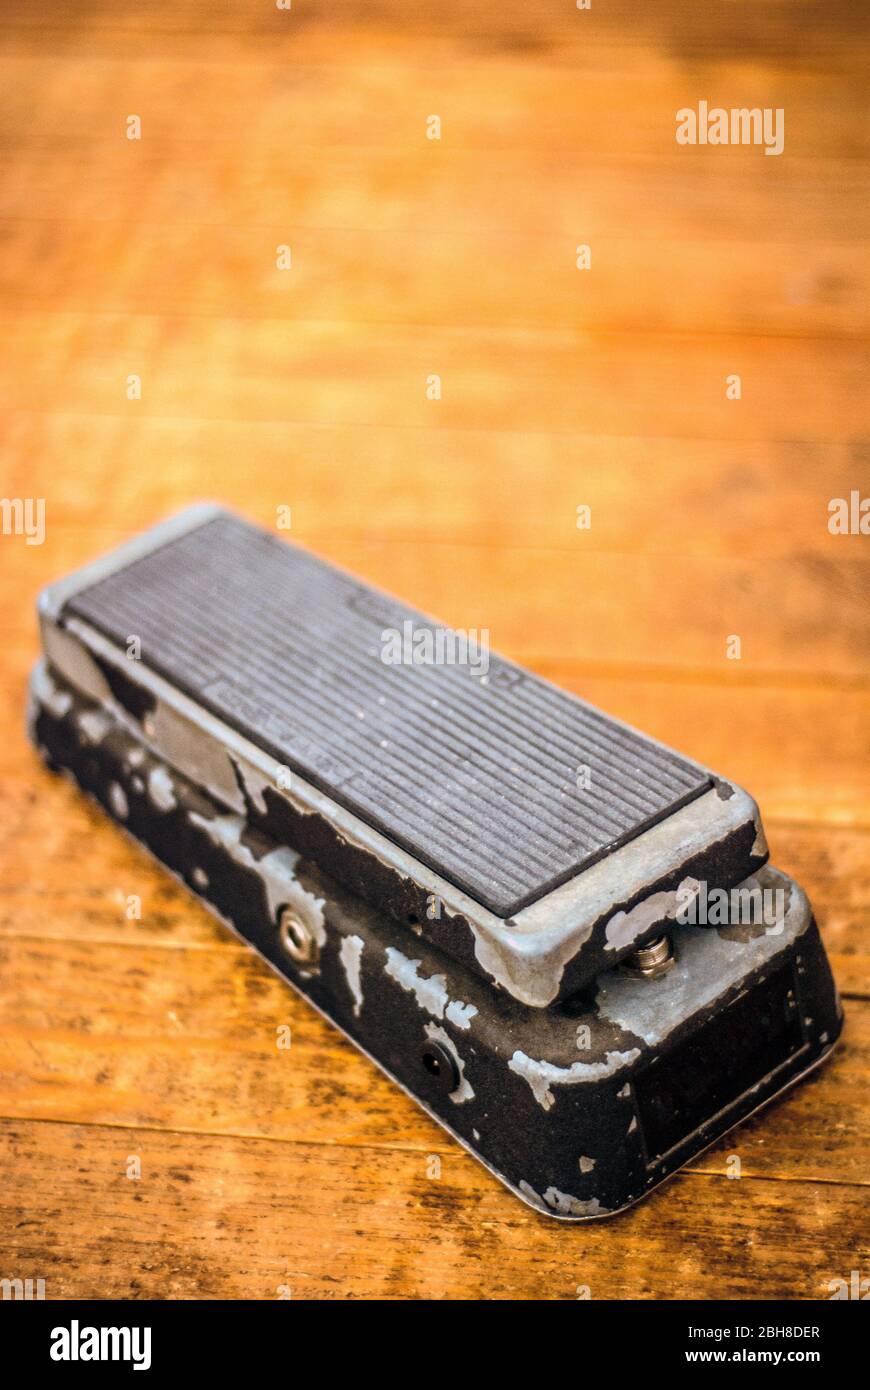 Vintage Wah Pedal on a Dirty Hard Wood Floor Stock Photo - Alamy